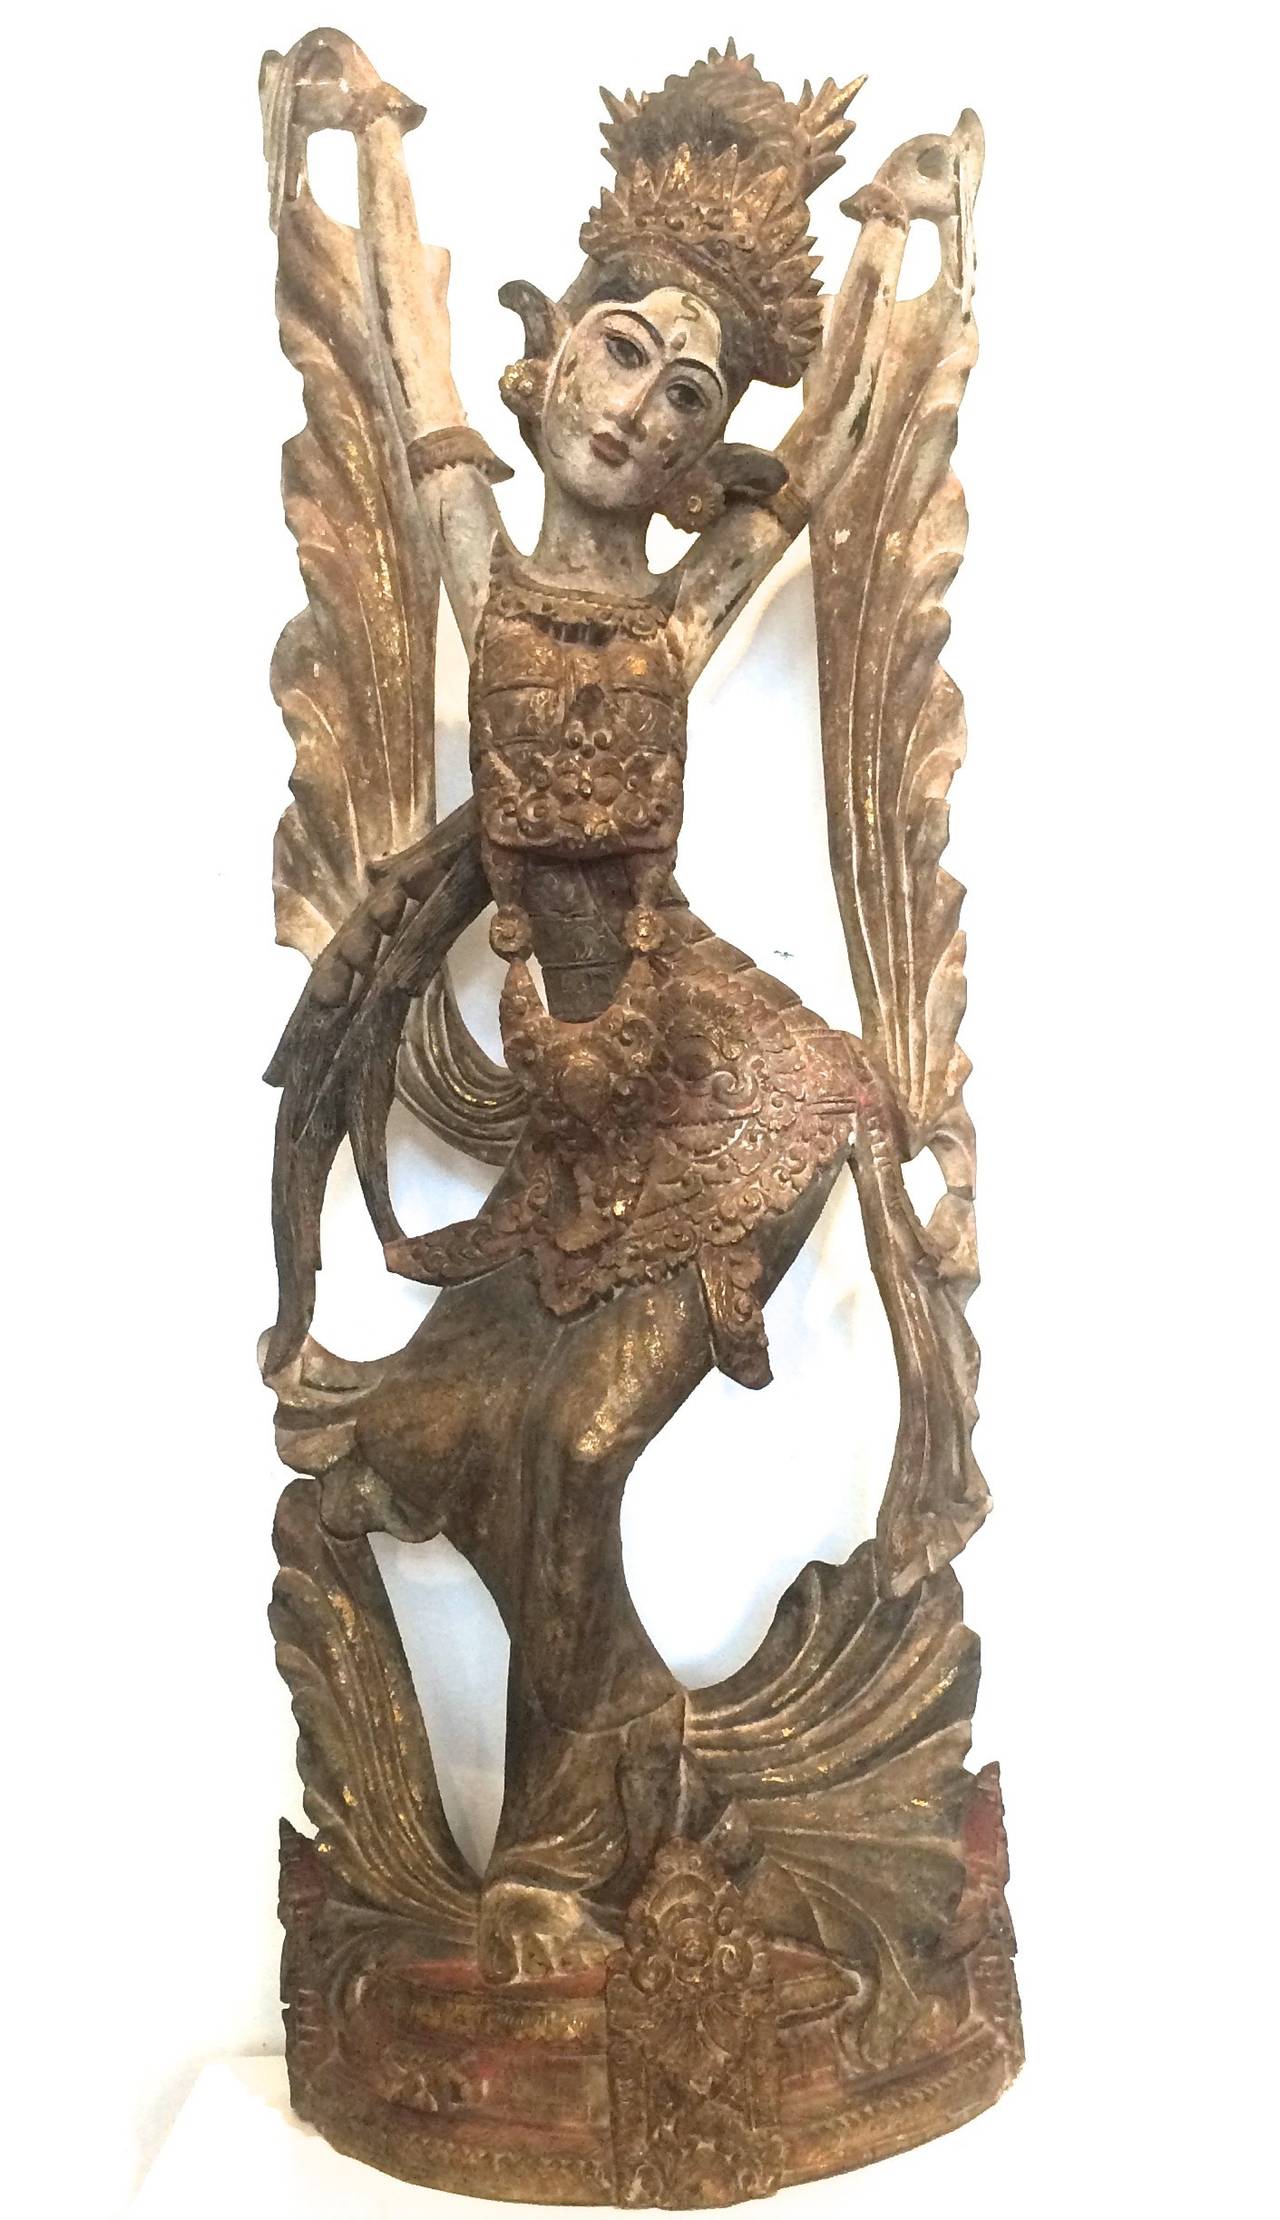 Unknown Figurative Sculpture - Balinese Wood Figure of a Dancer